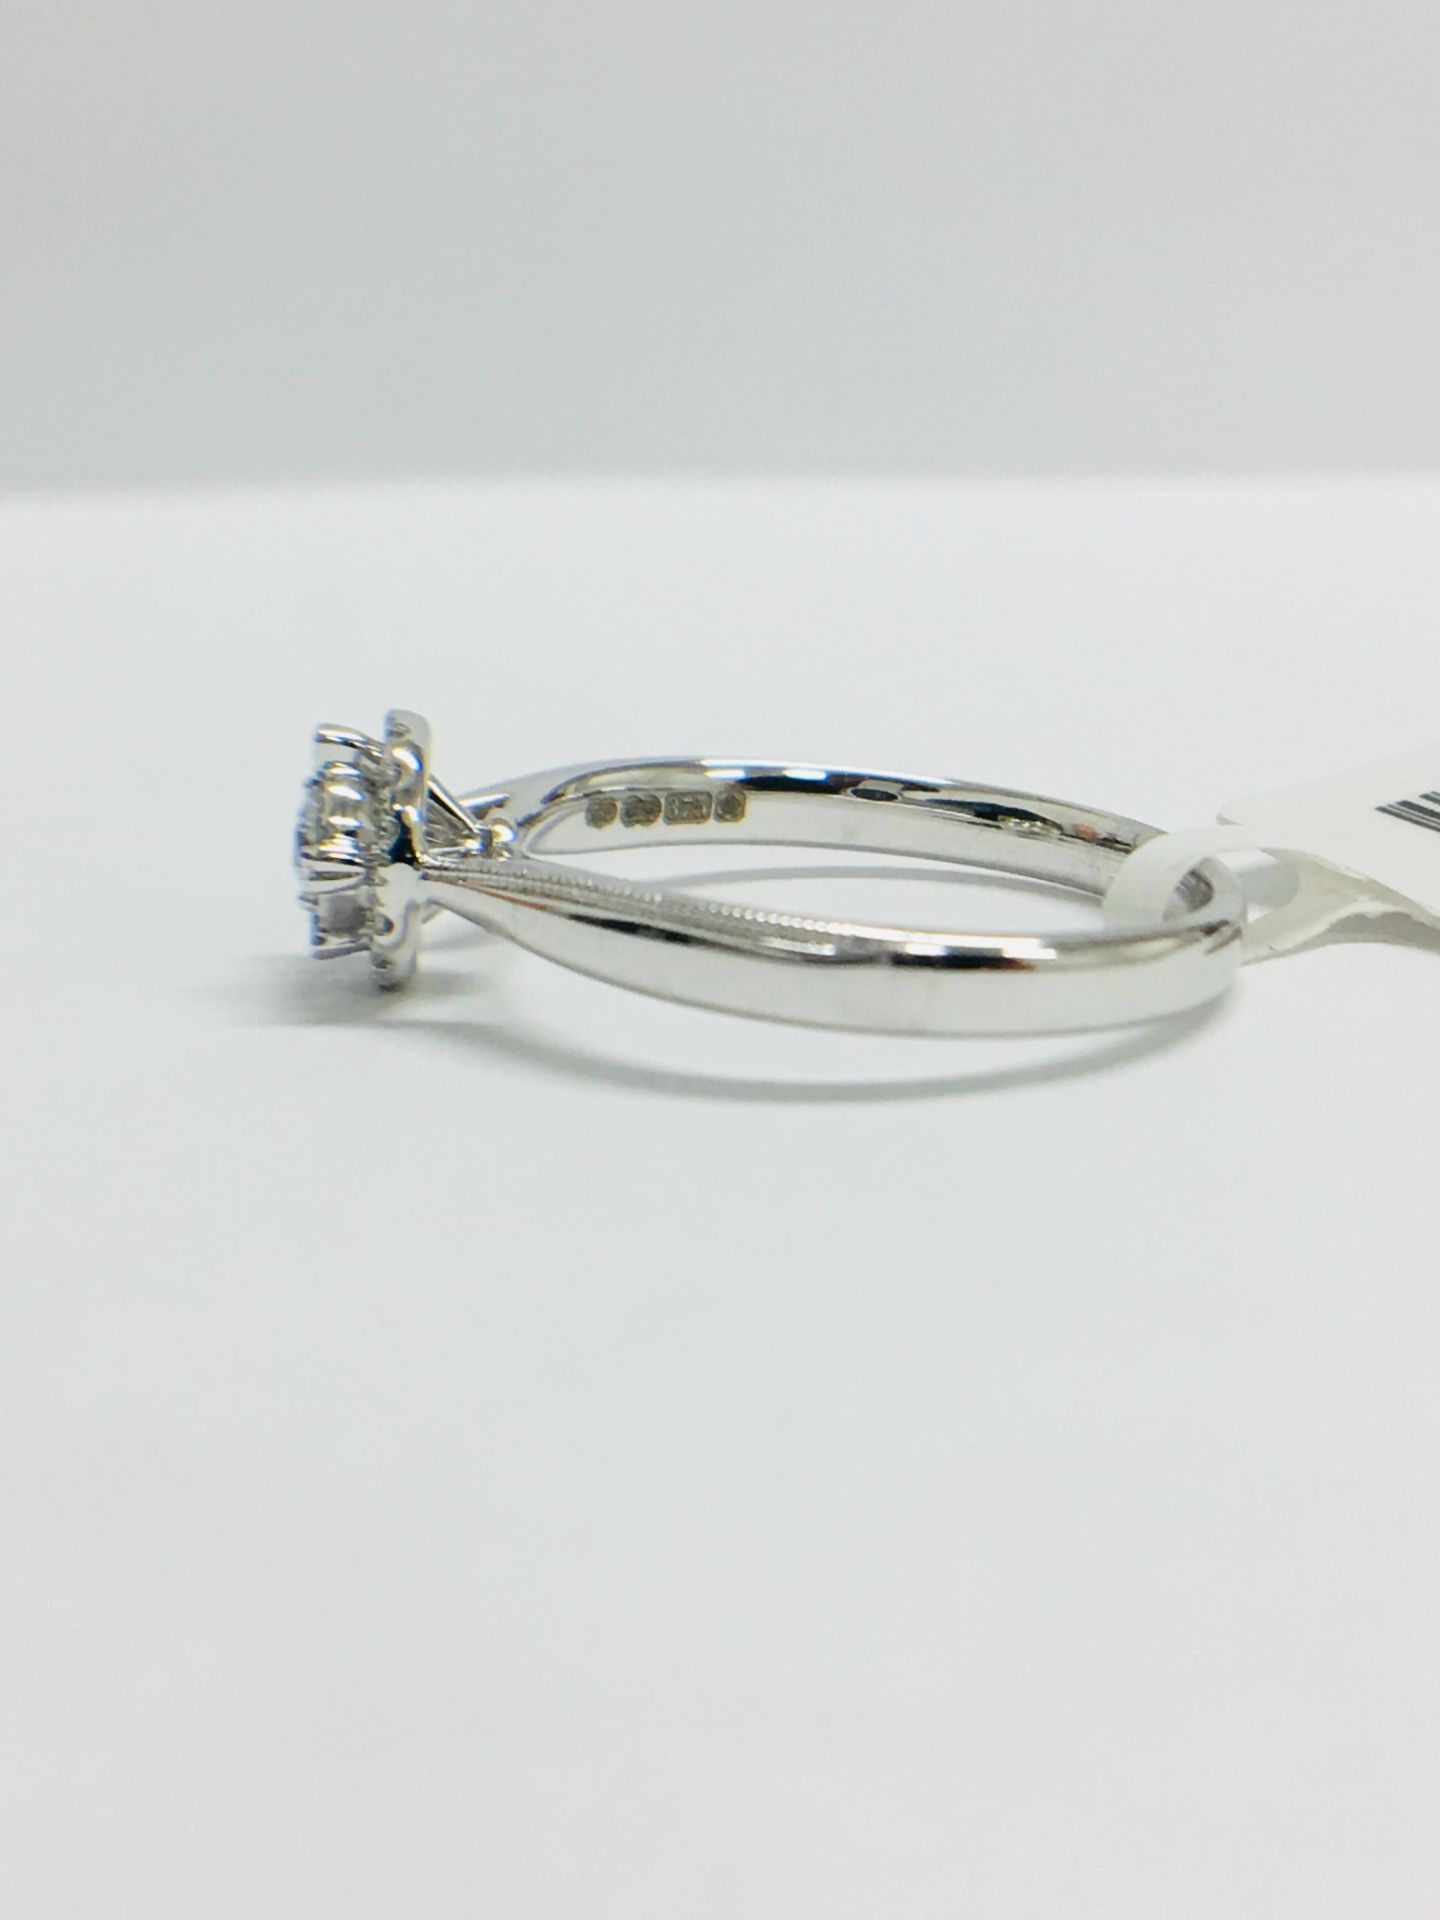 9CT White Gold diamond Solitaire illusion set ring with a millegrain edge shank - Image 3 of 11